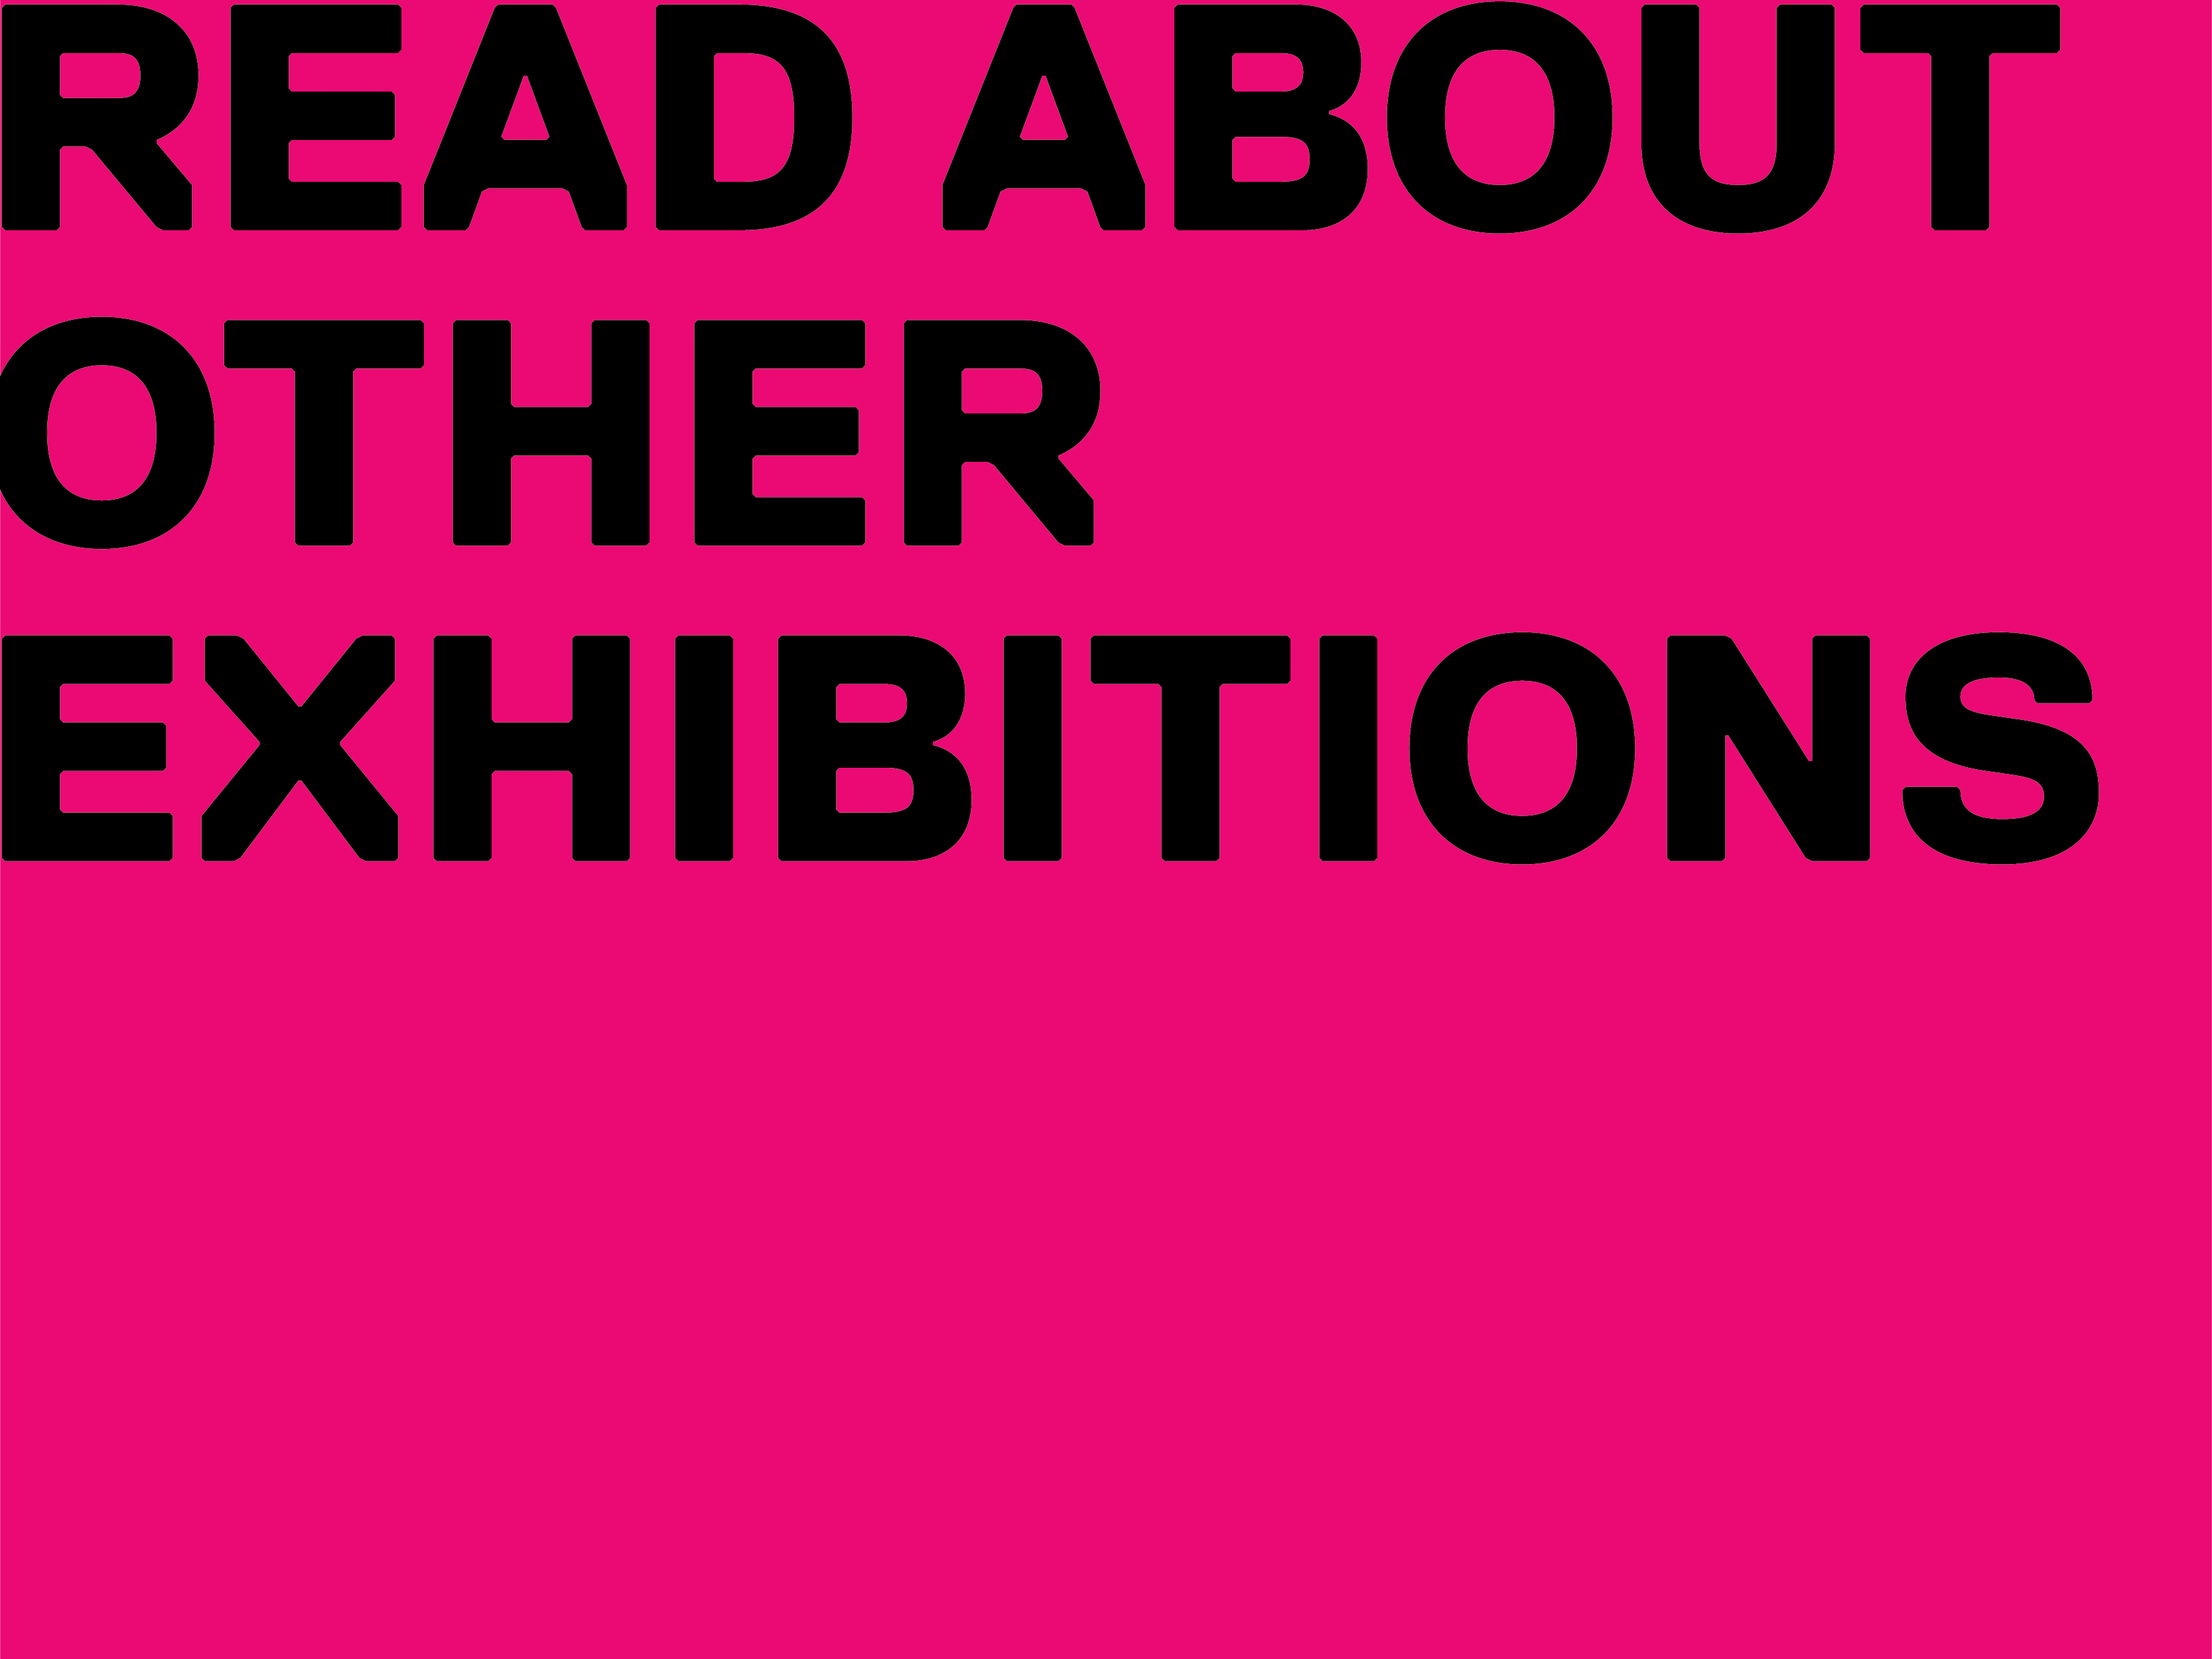 Read about other exhibitions.